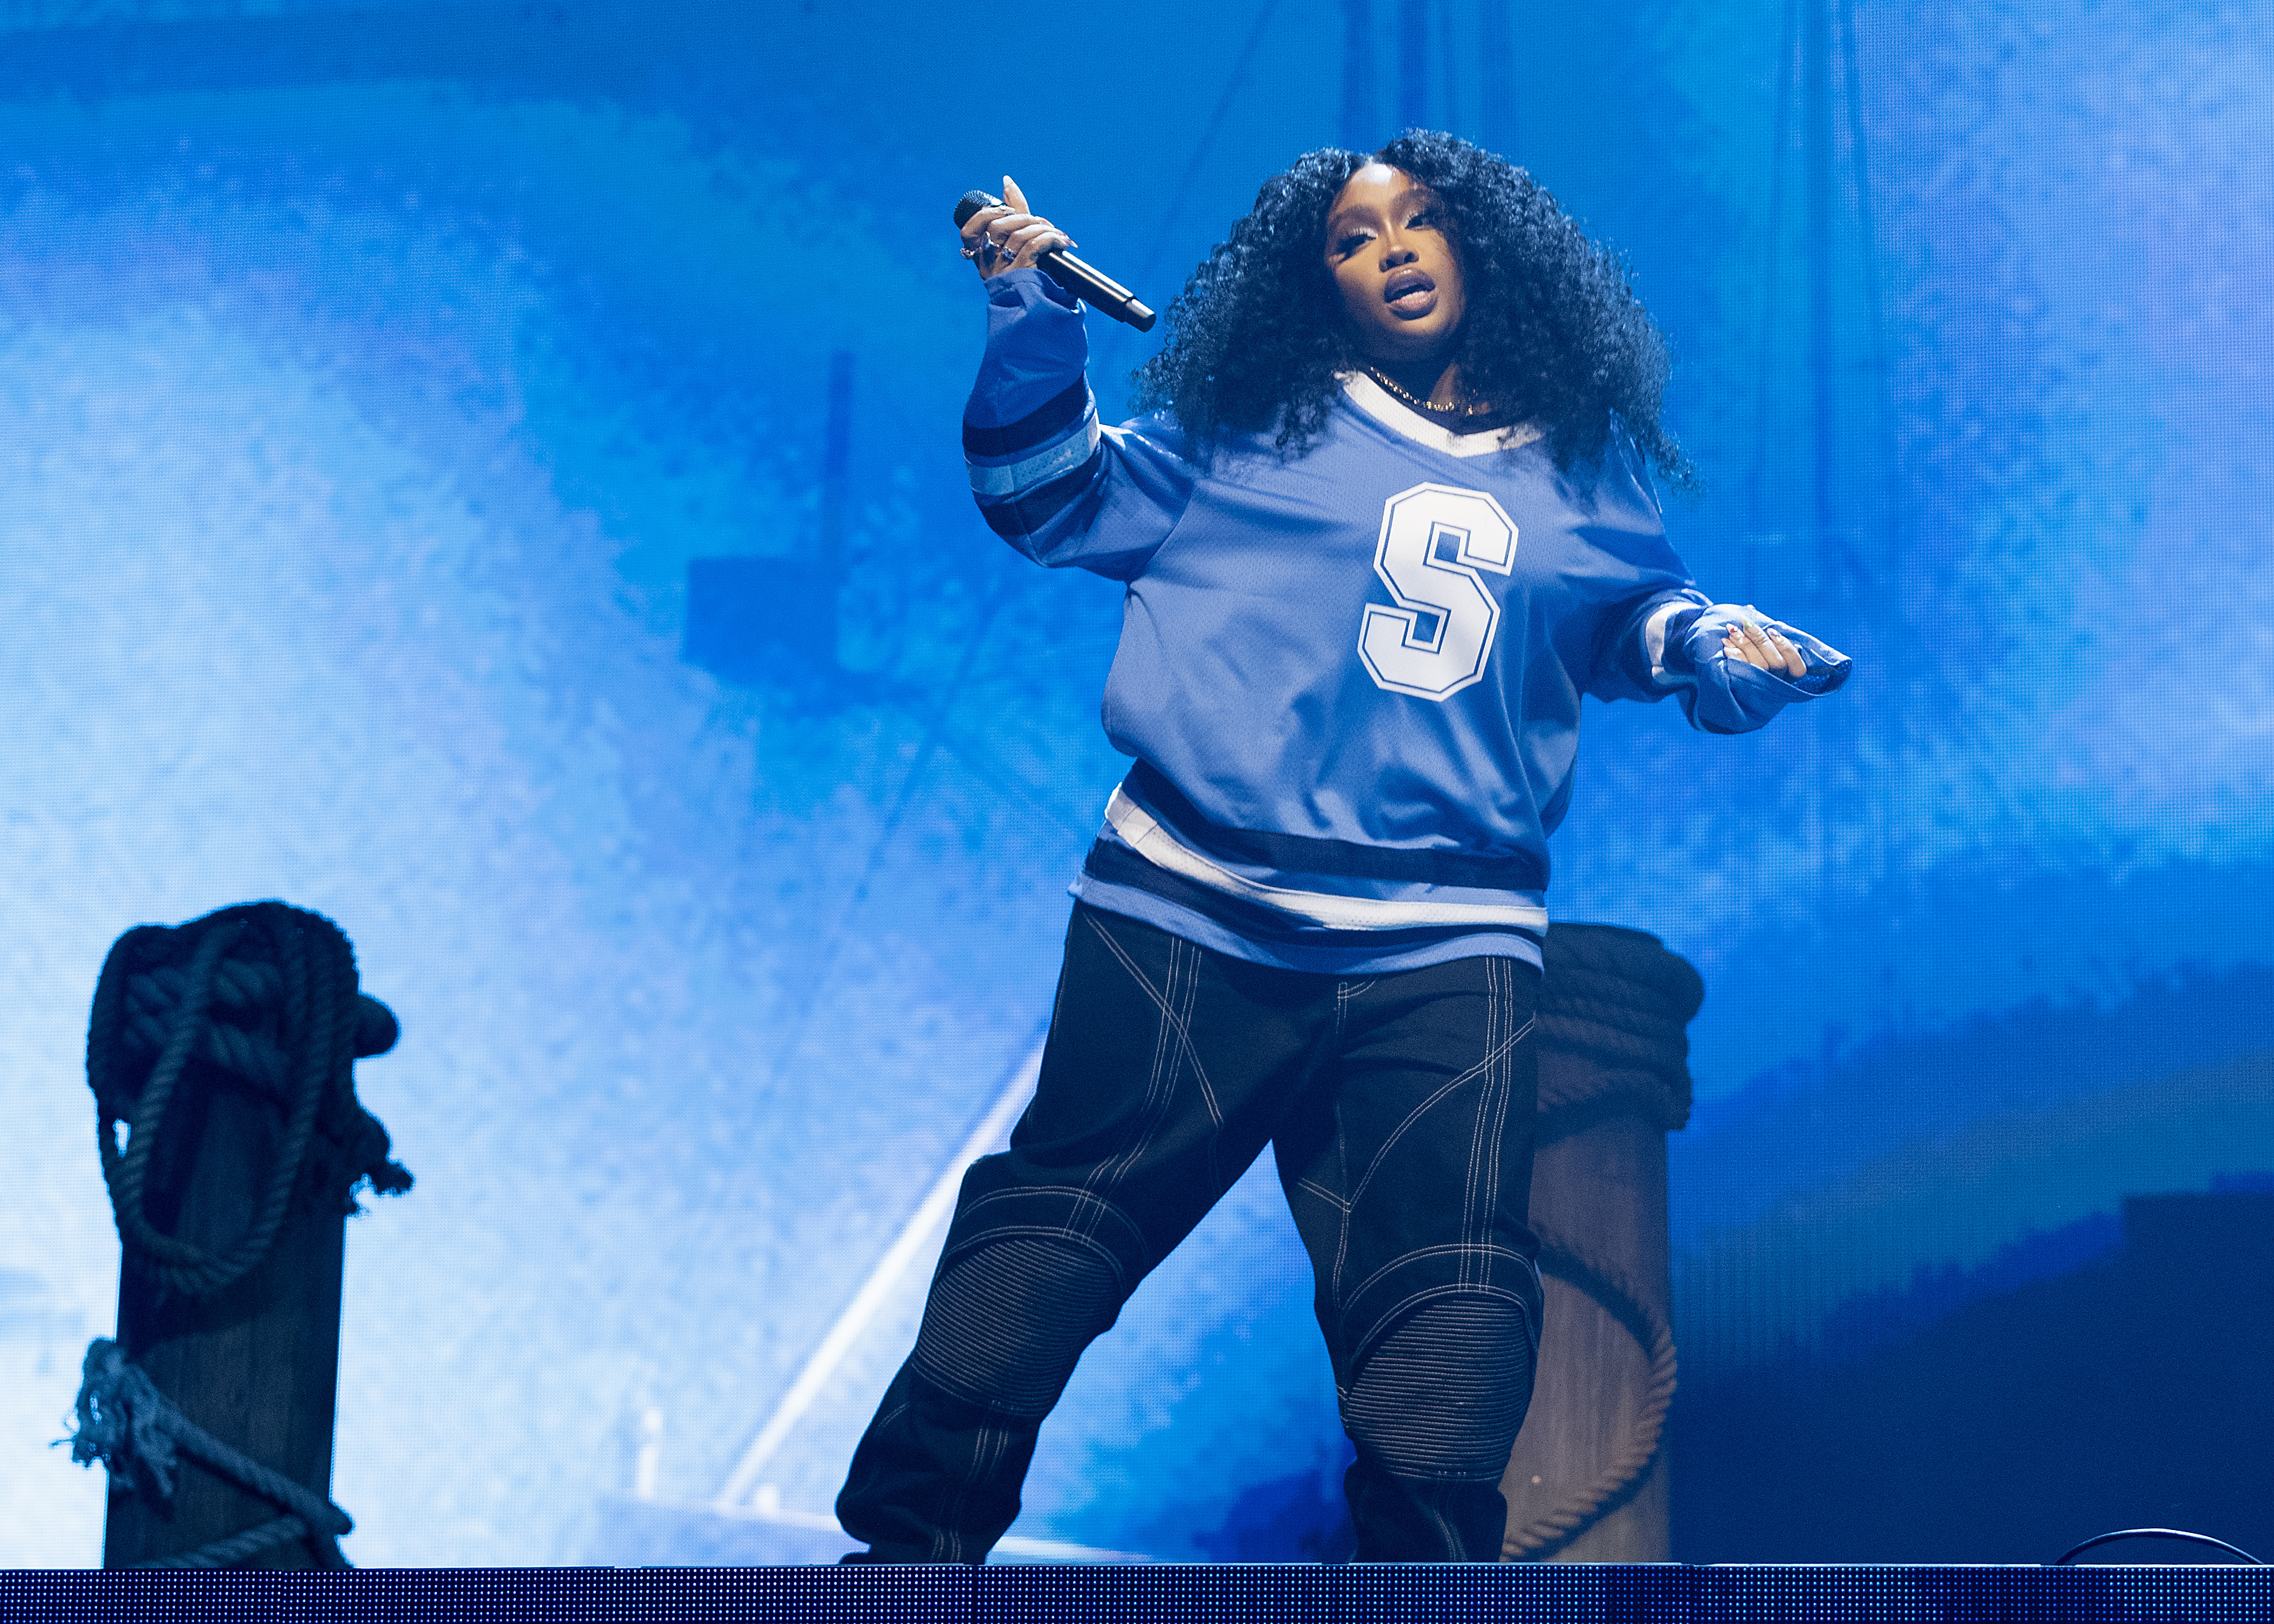 SZA performing onstage in loose jeans and a jersey